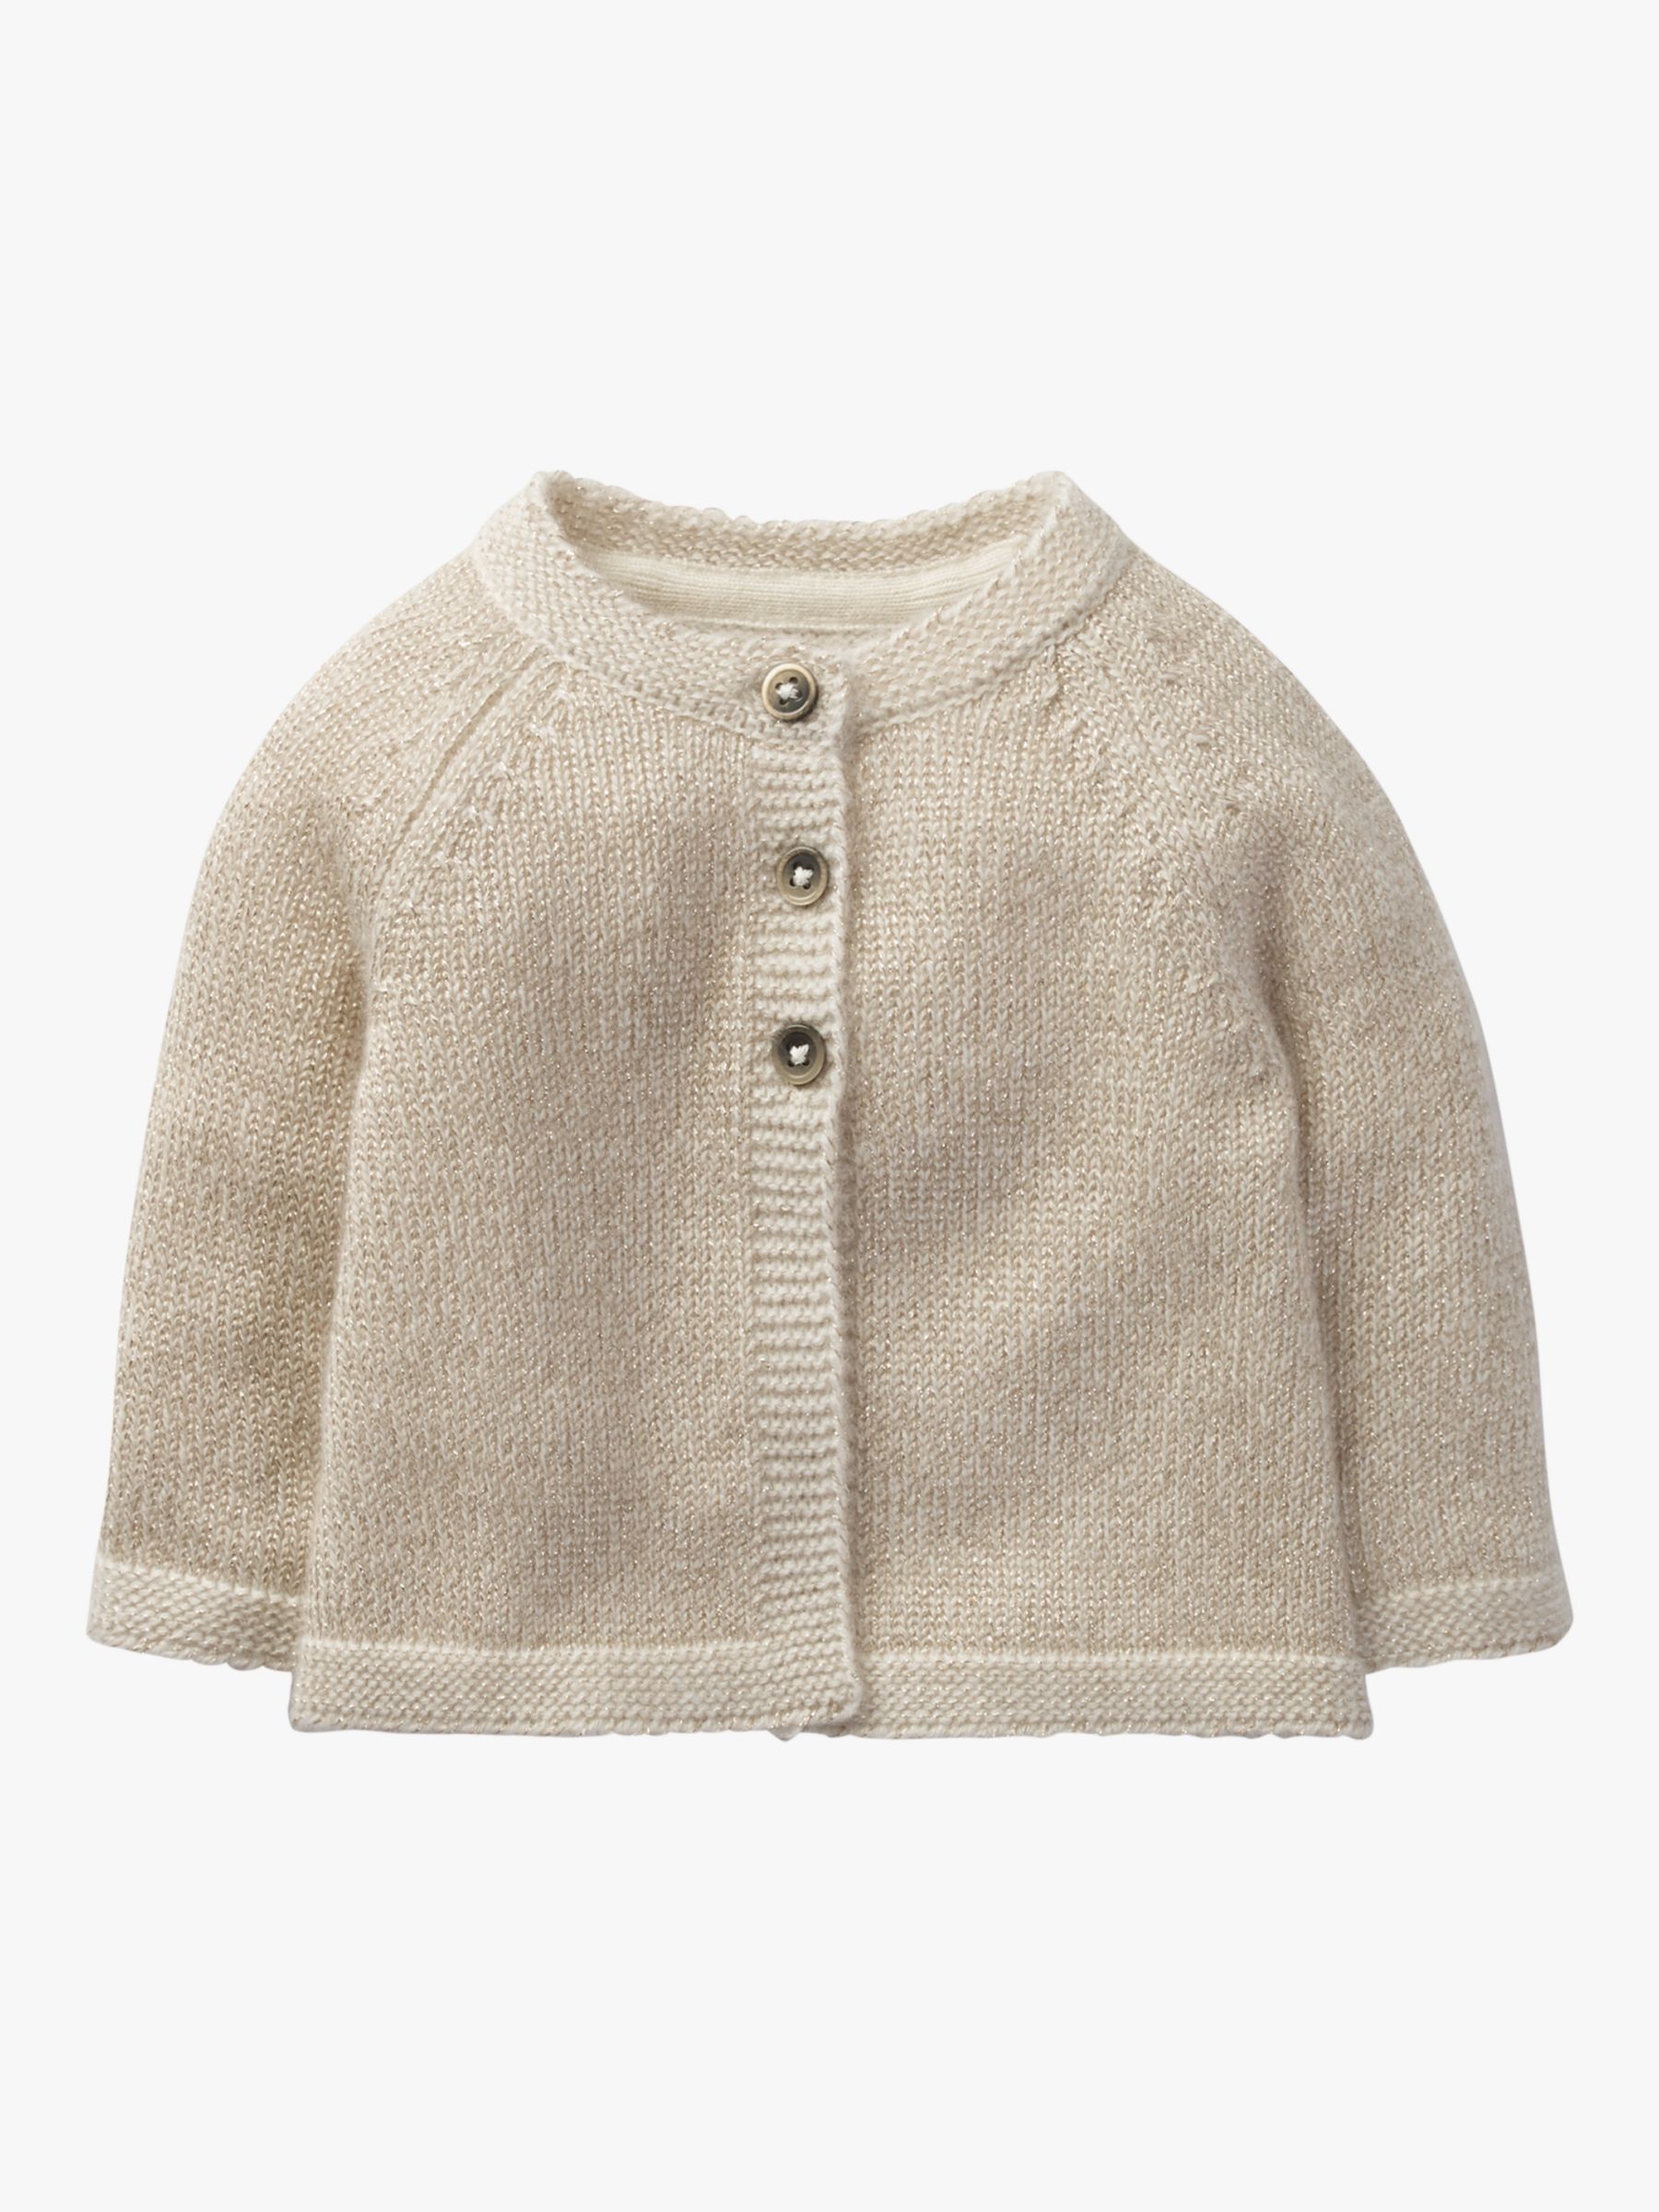 Mini Boden Baby Cashmere Cardigan, Gold Sparkle at John Lewis & Partners